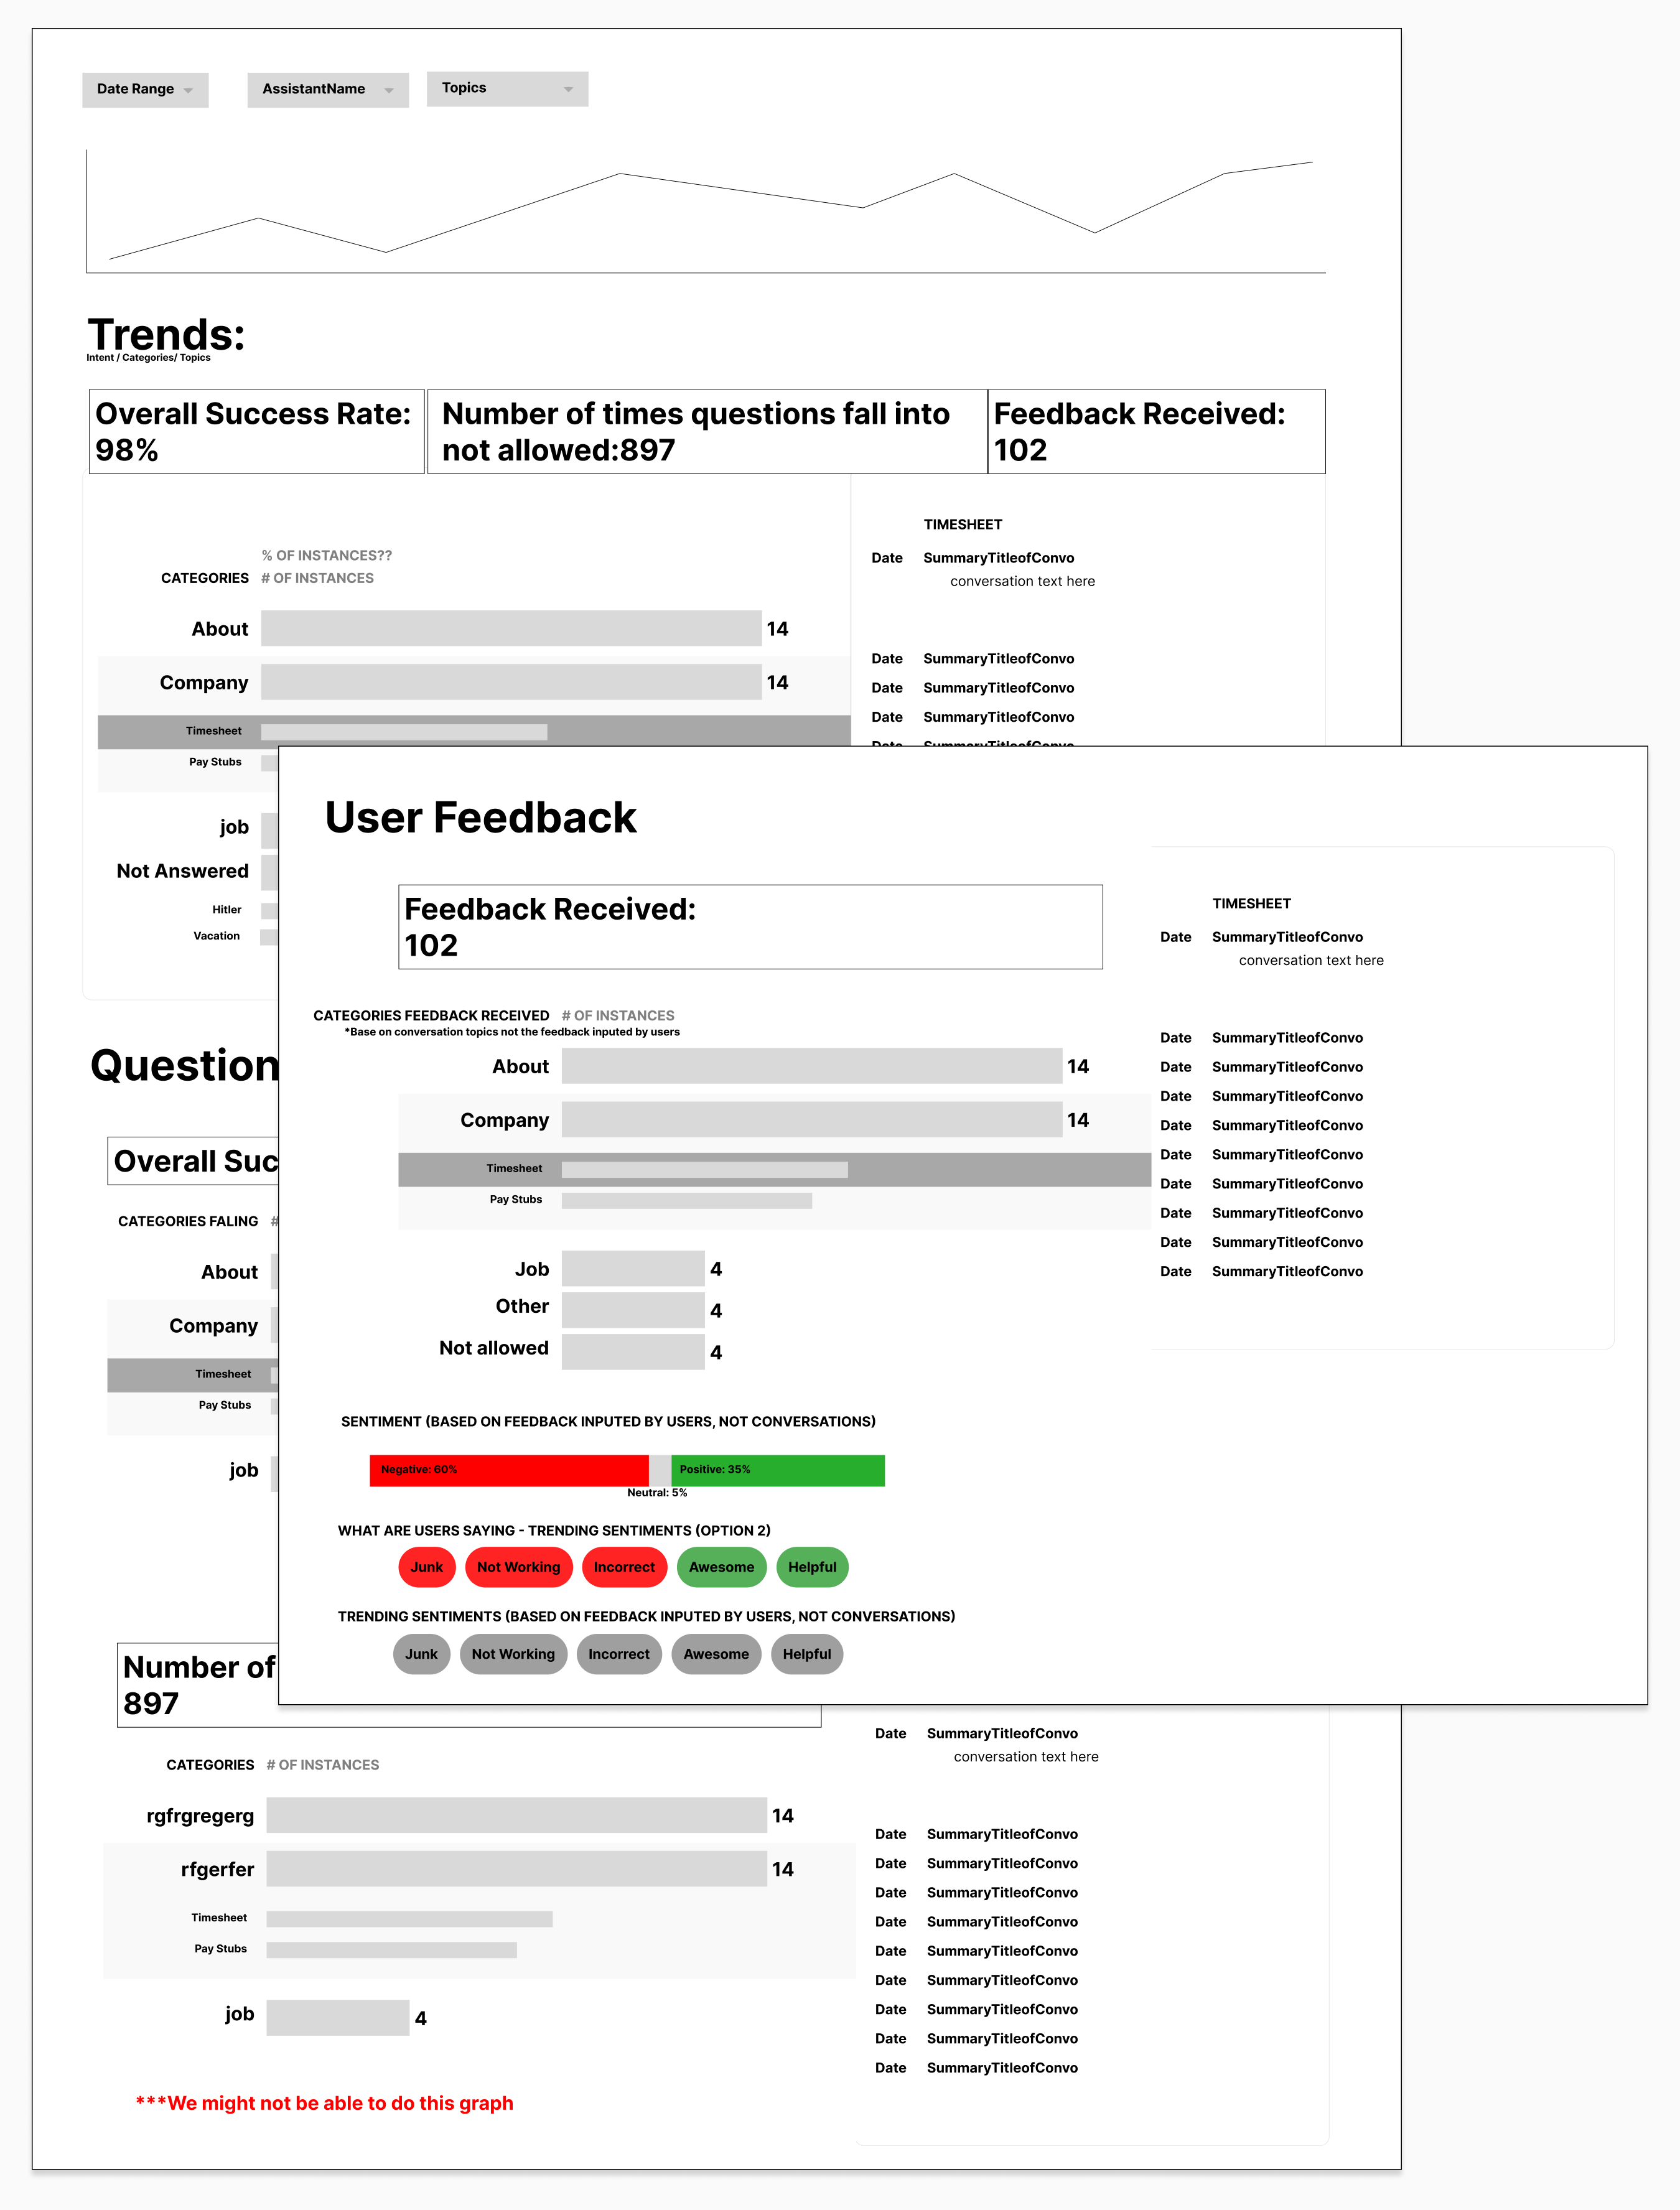 wireframes that are starting to look better